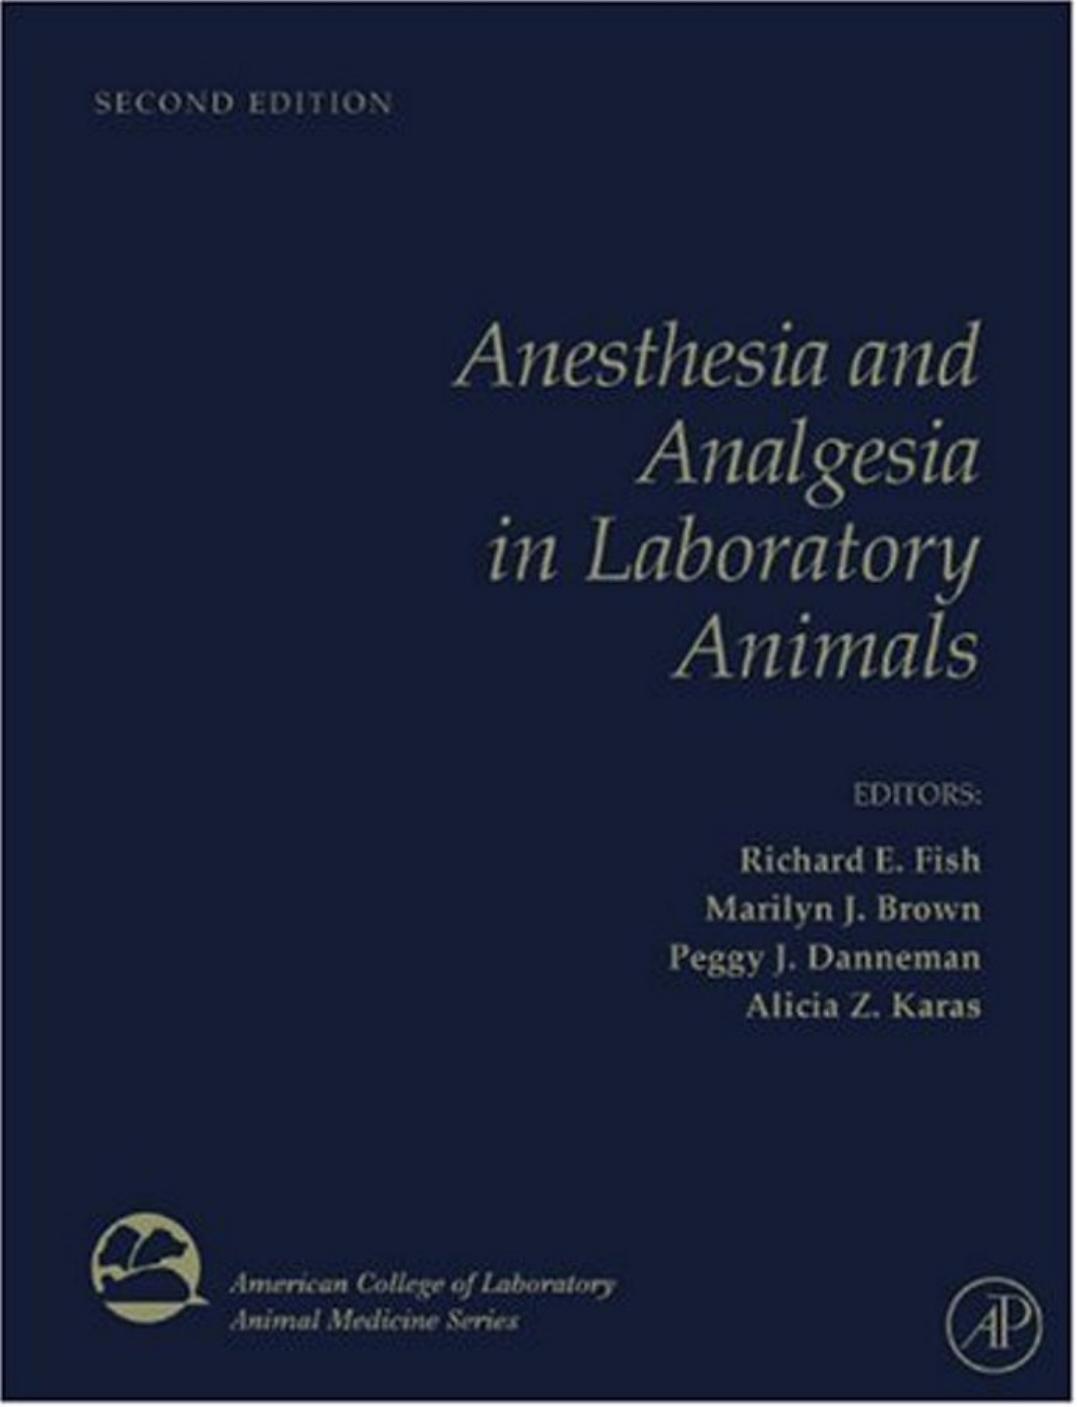 Anesthesia and Analgesia in Laboratory Animals 2008